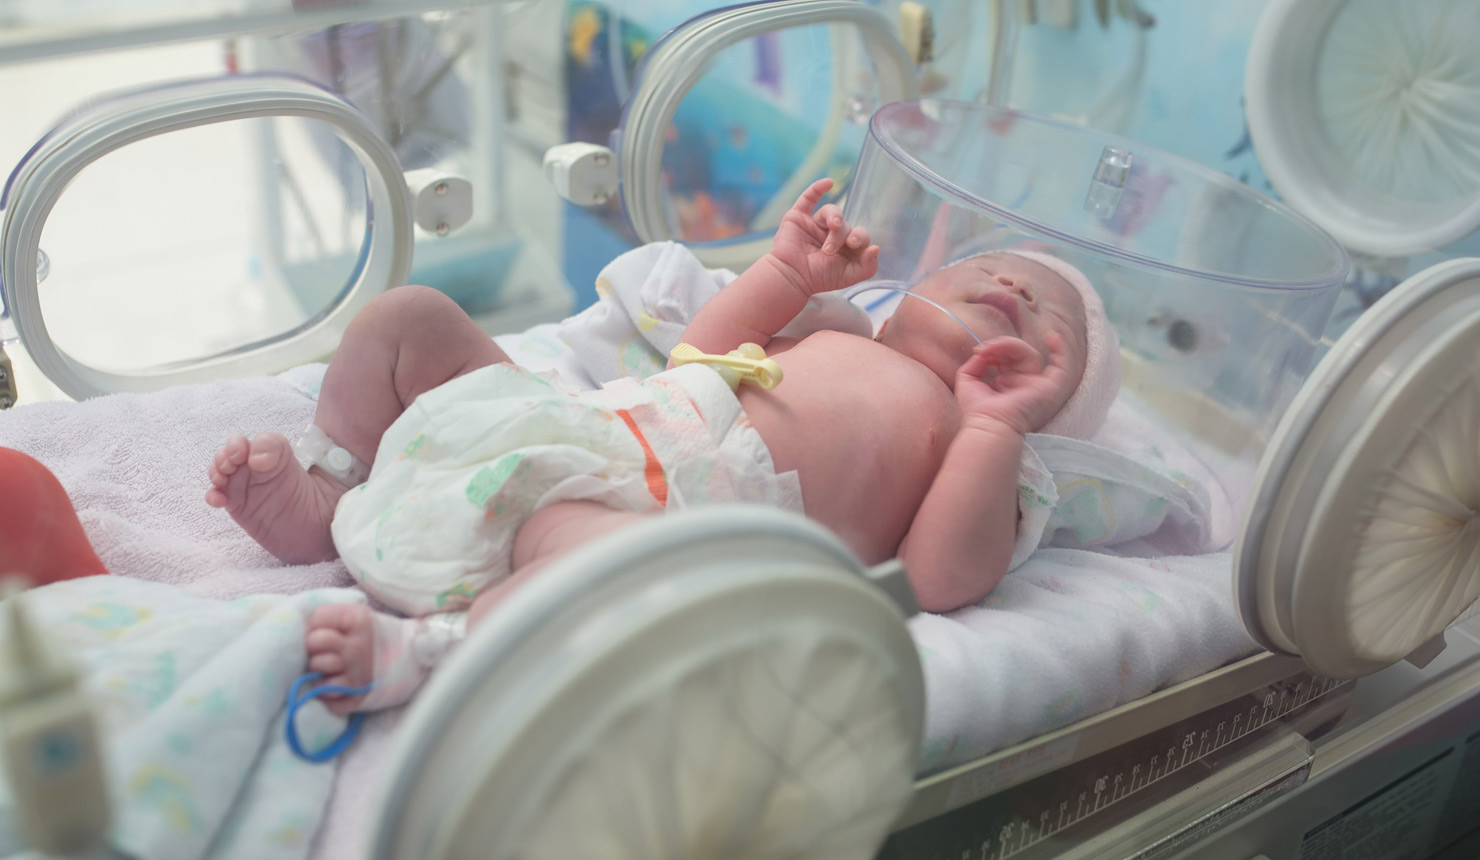 Shining a Bright Light on the Care of Sick Babies